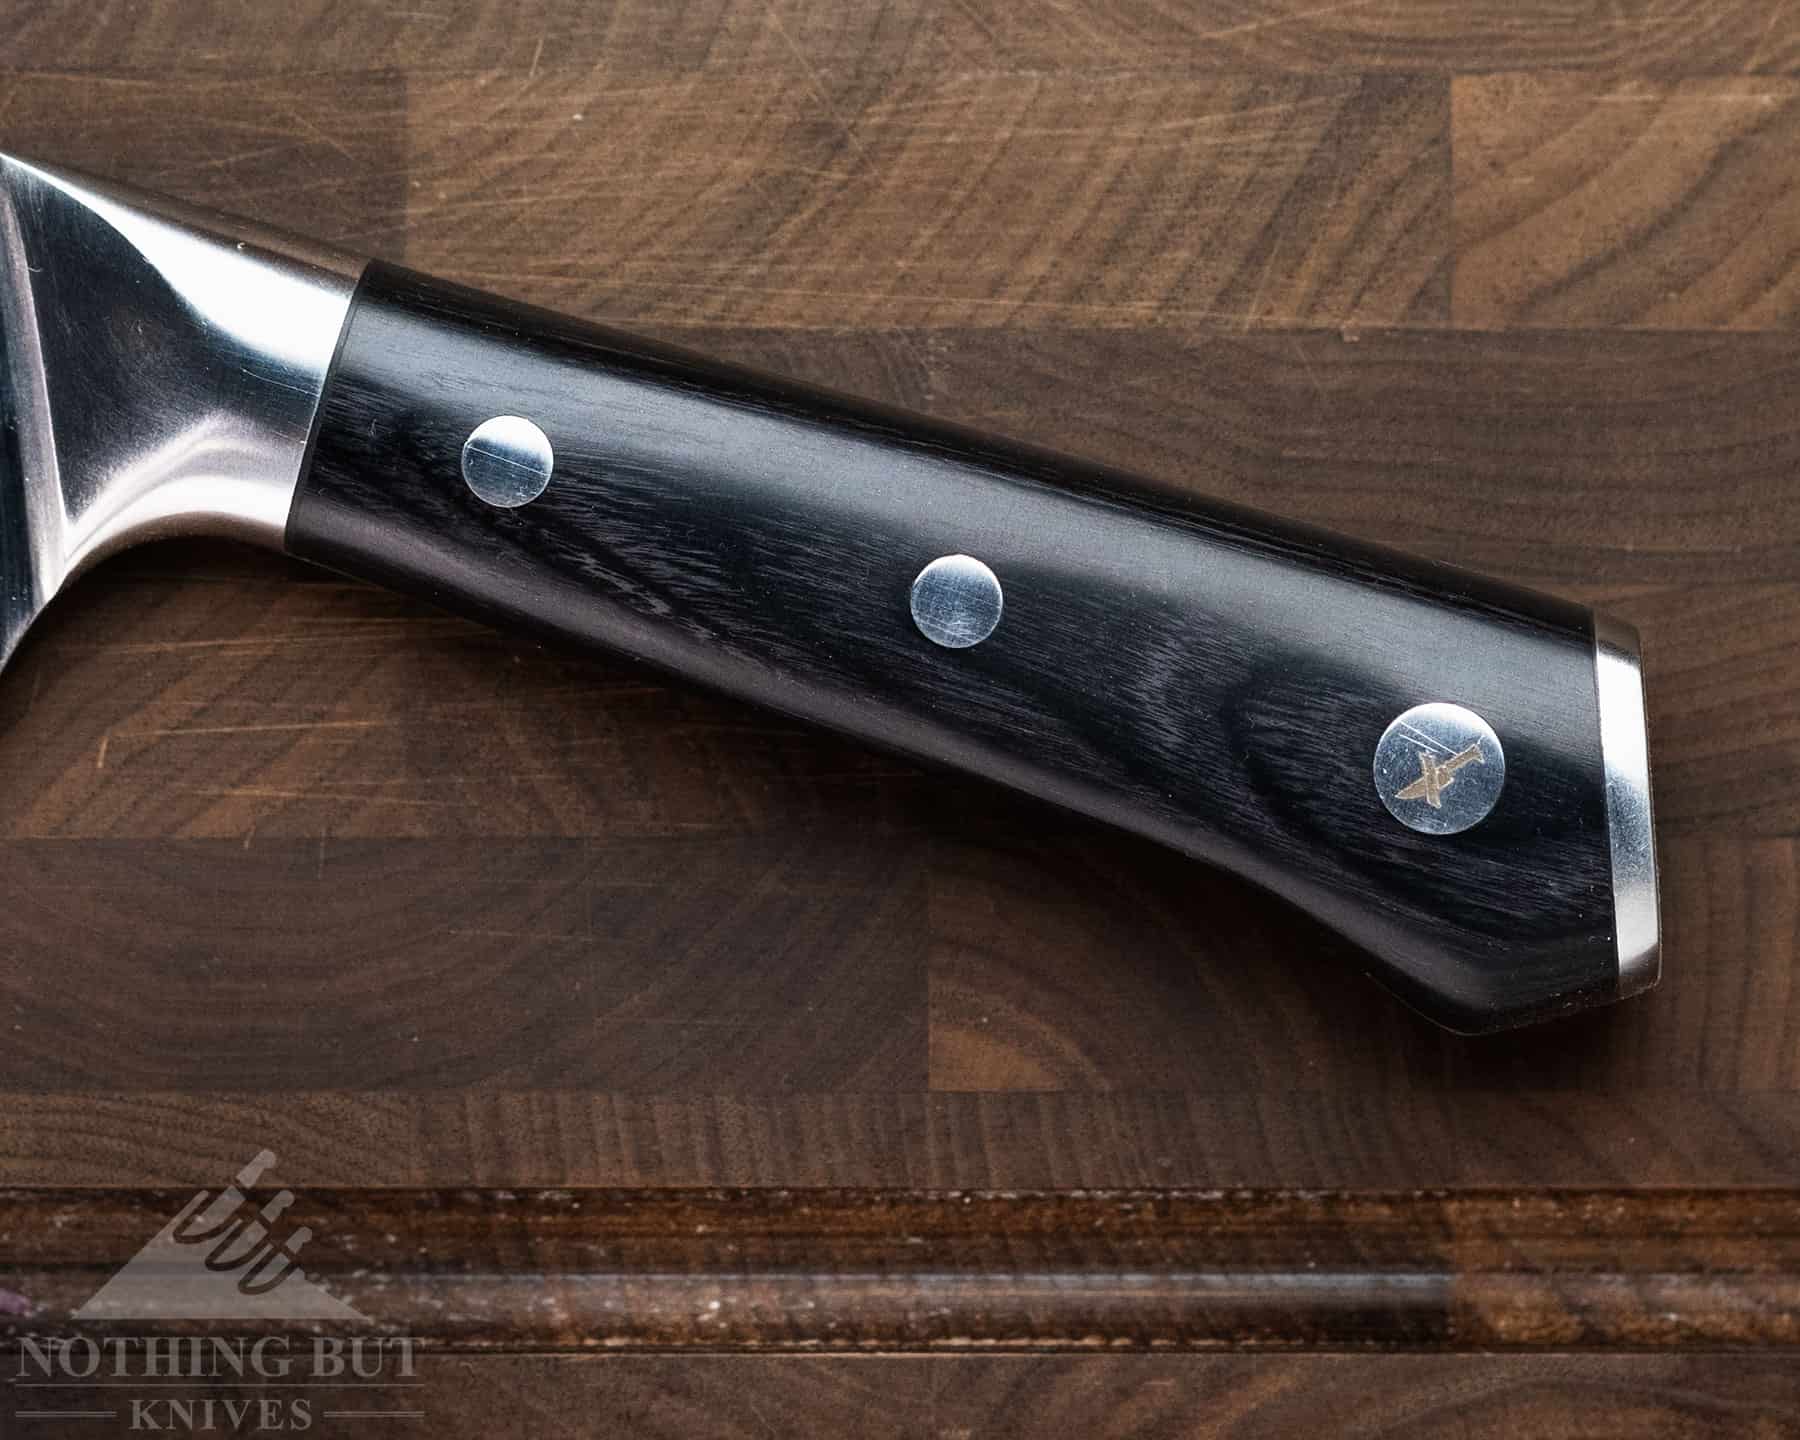 Spyderco K11 Cook's Knife Review